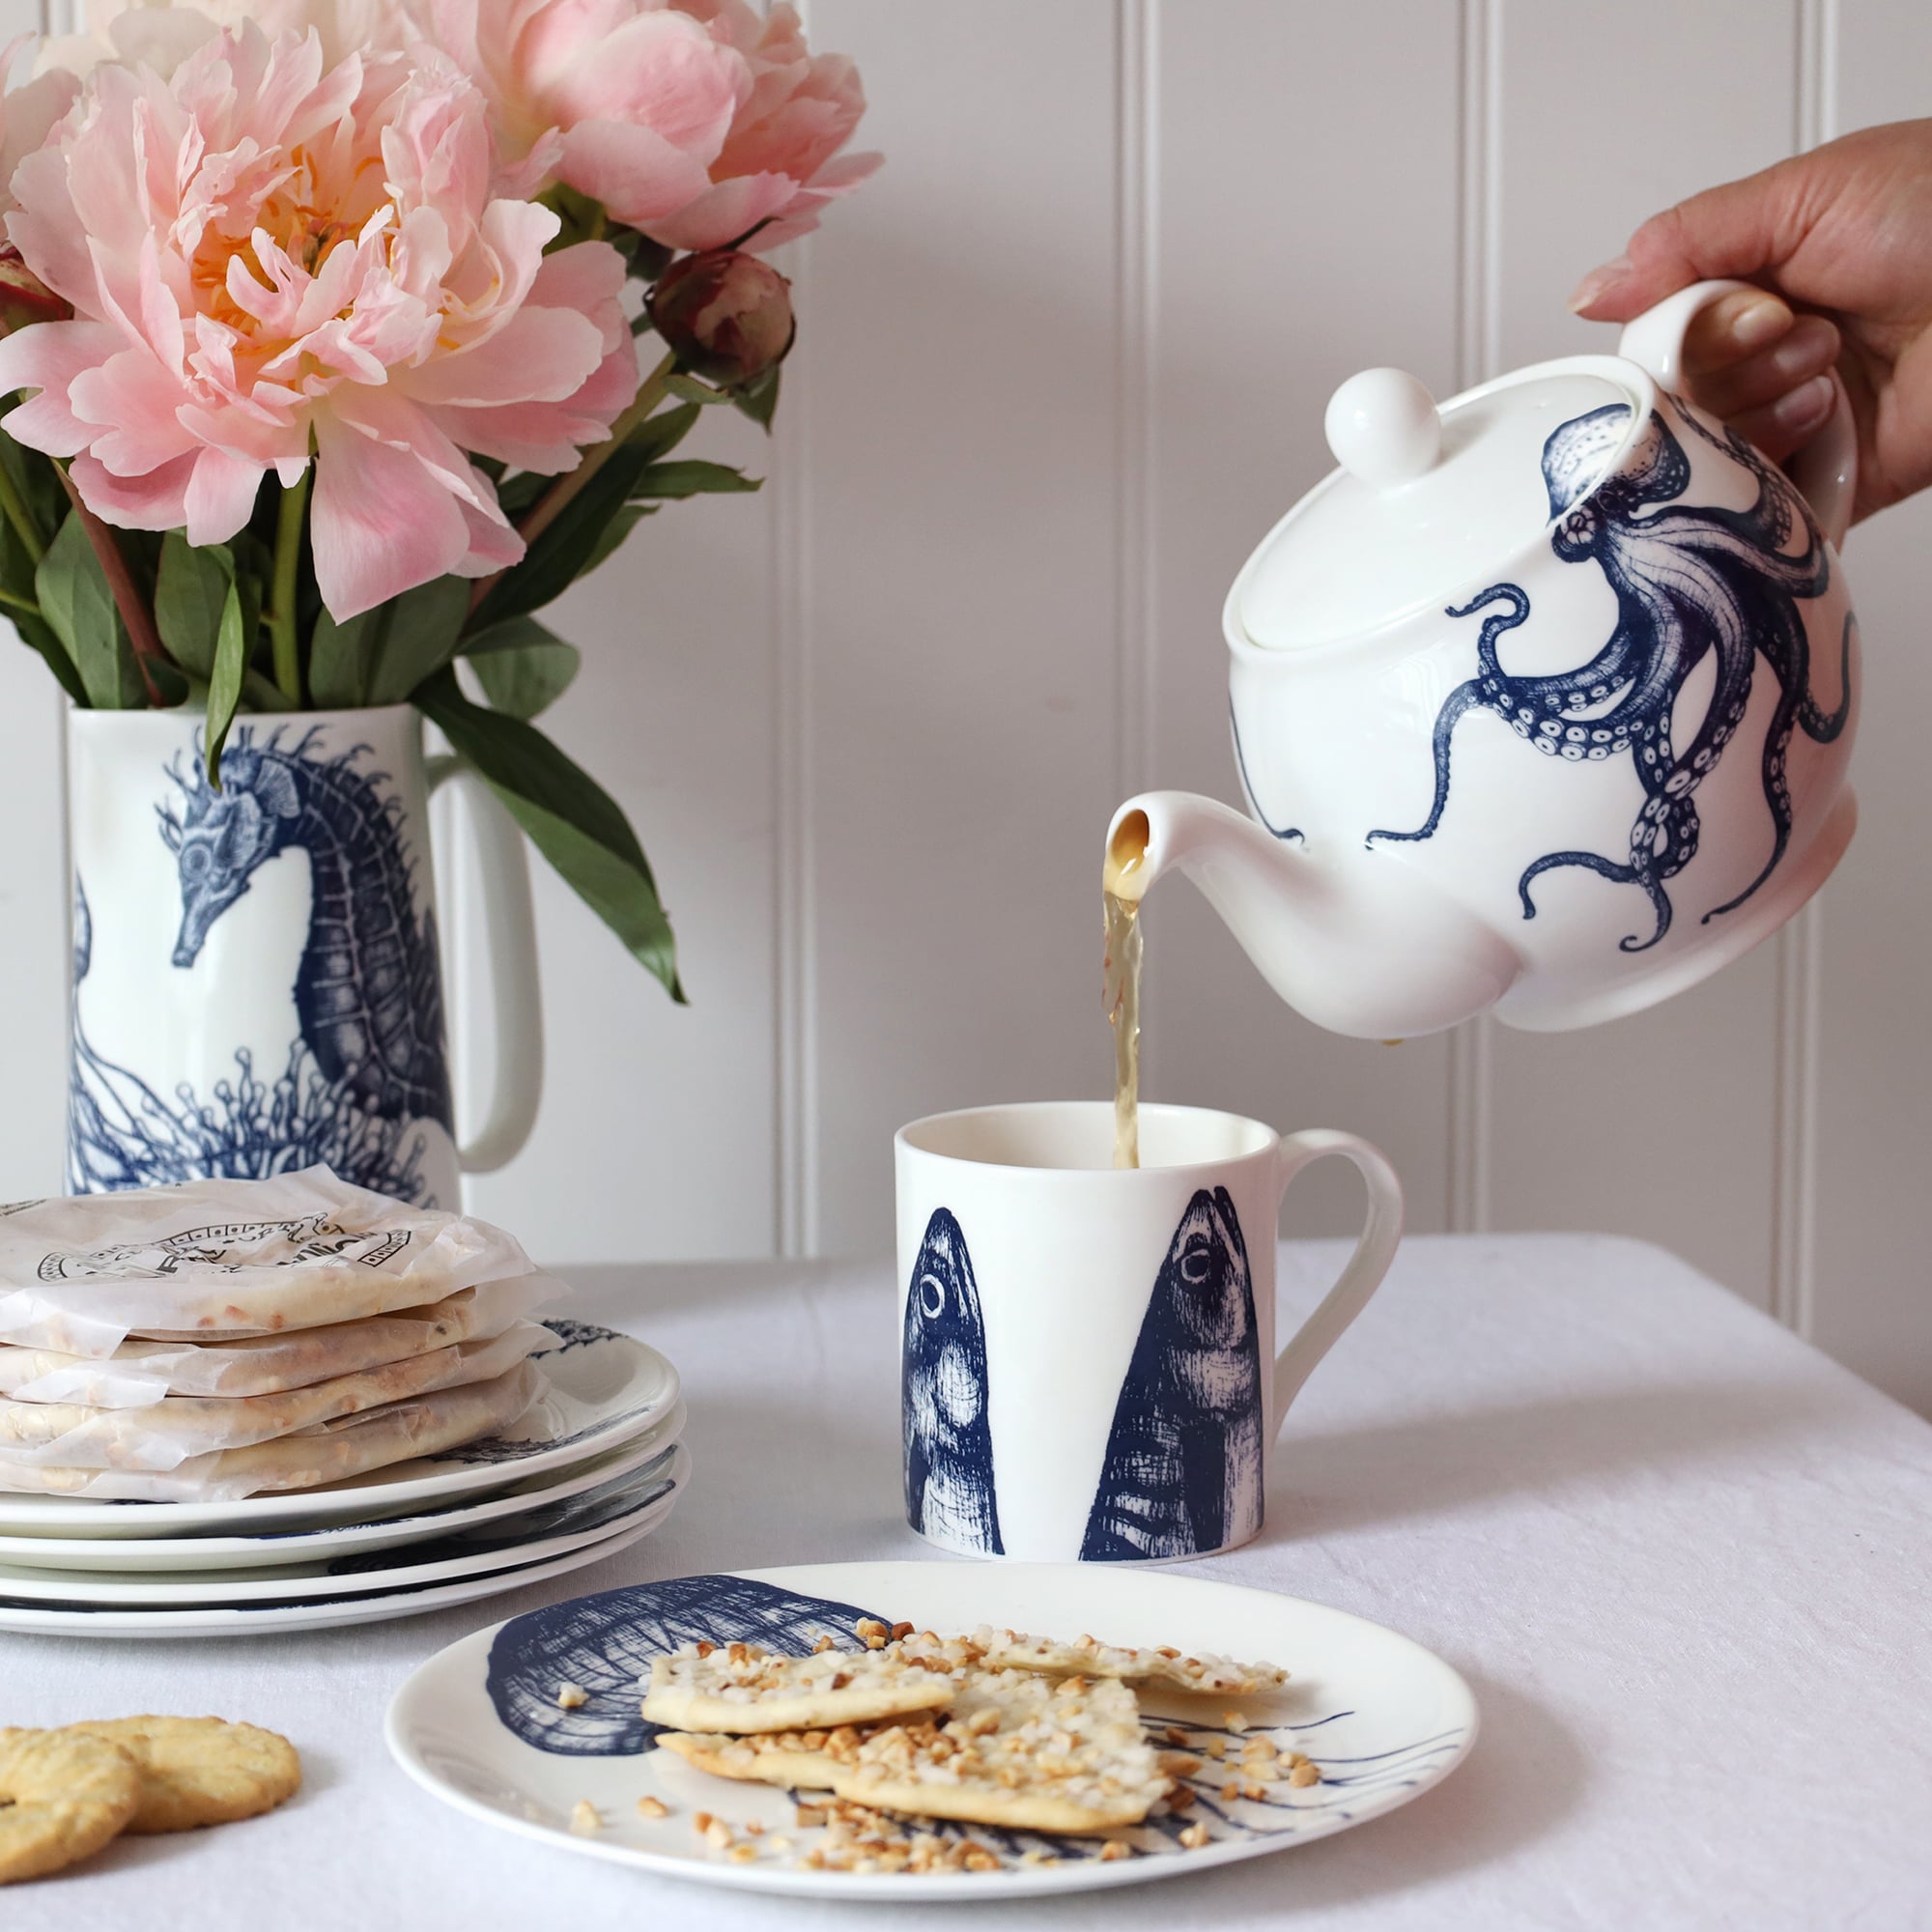 An informal table setting with blue & white coastal bone china on white linen and a shiplap background. There is an teapot with an octopus design pouring tea into a white mug that is decorated with a dark blue illustrated mackerel heads design.